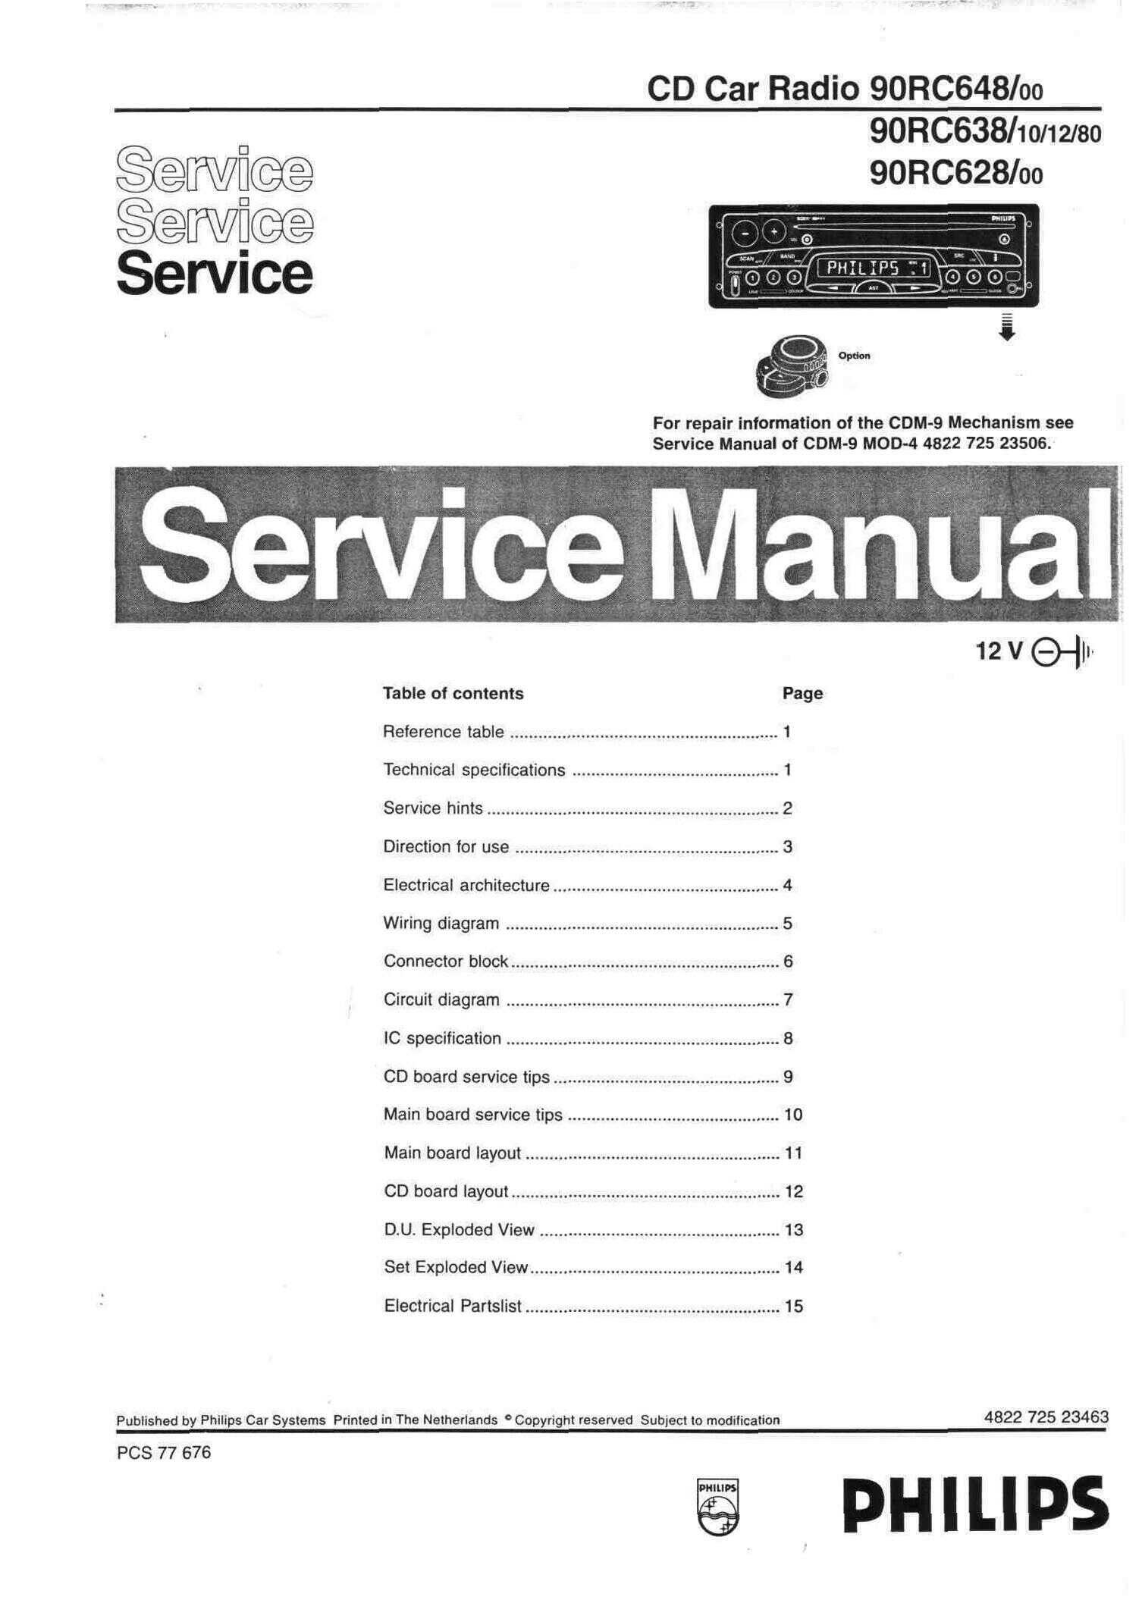 Philips 90-RC-648, 90-RC-638, 90-RC-628 Service Manual